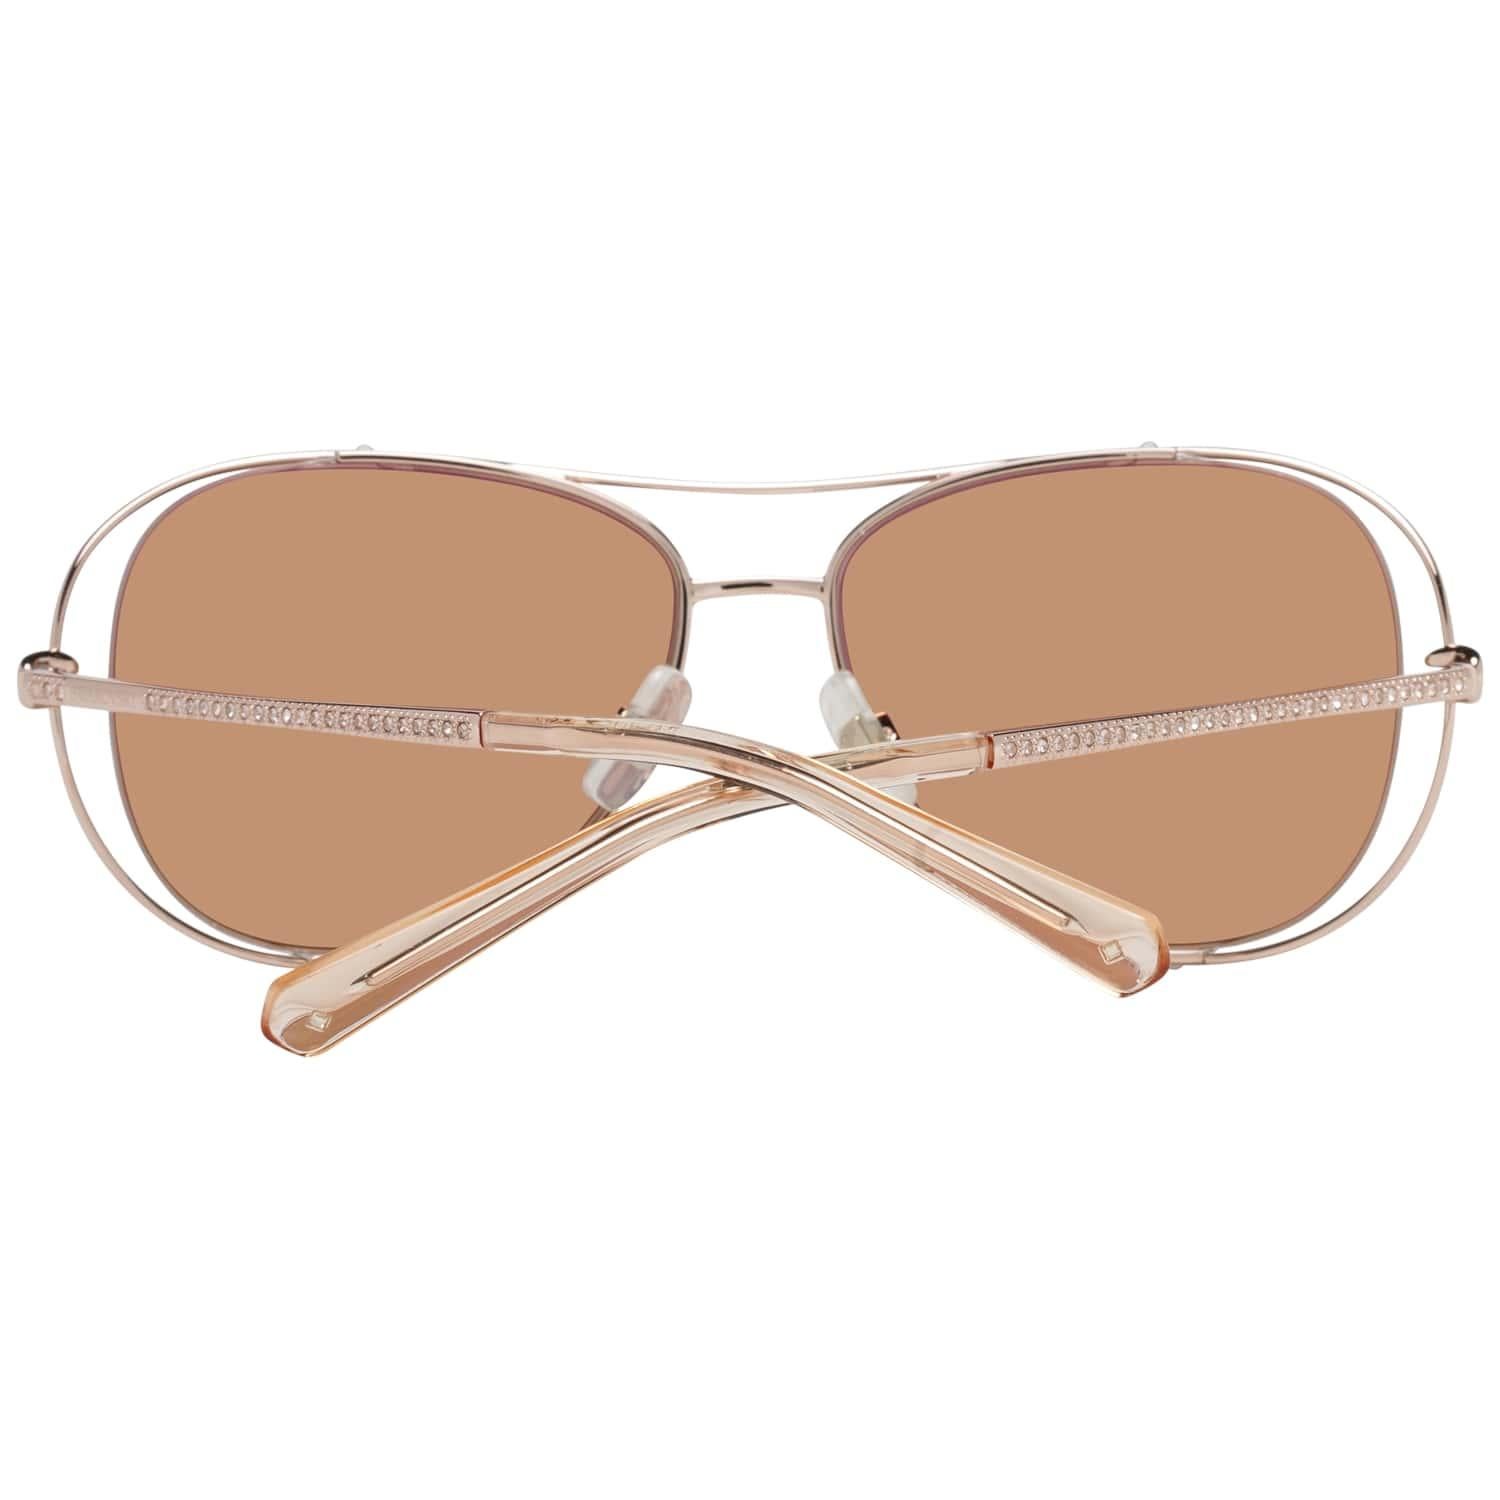 Swarovski Mint Women Rose Gold Sunglasses SK0231 5528G 55-15-140 mm In Excellent Condition In Rome, Rome